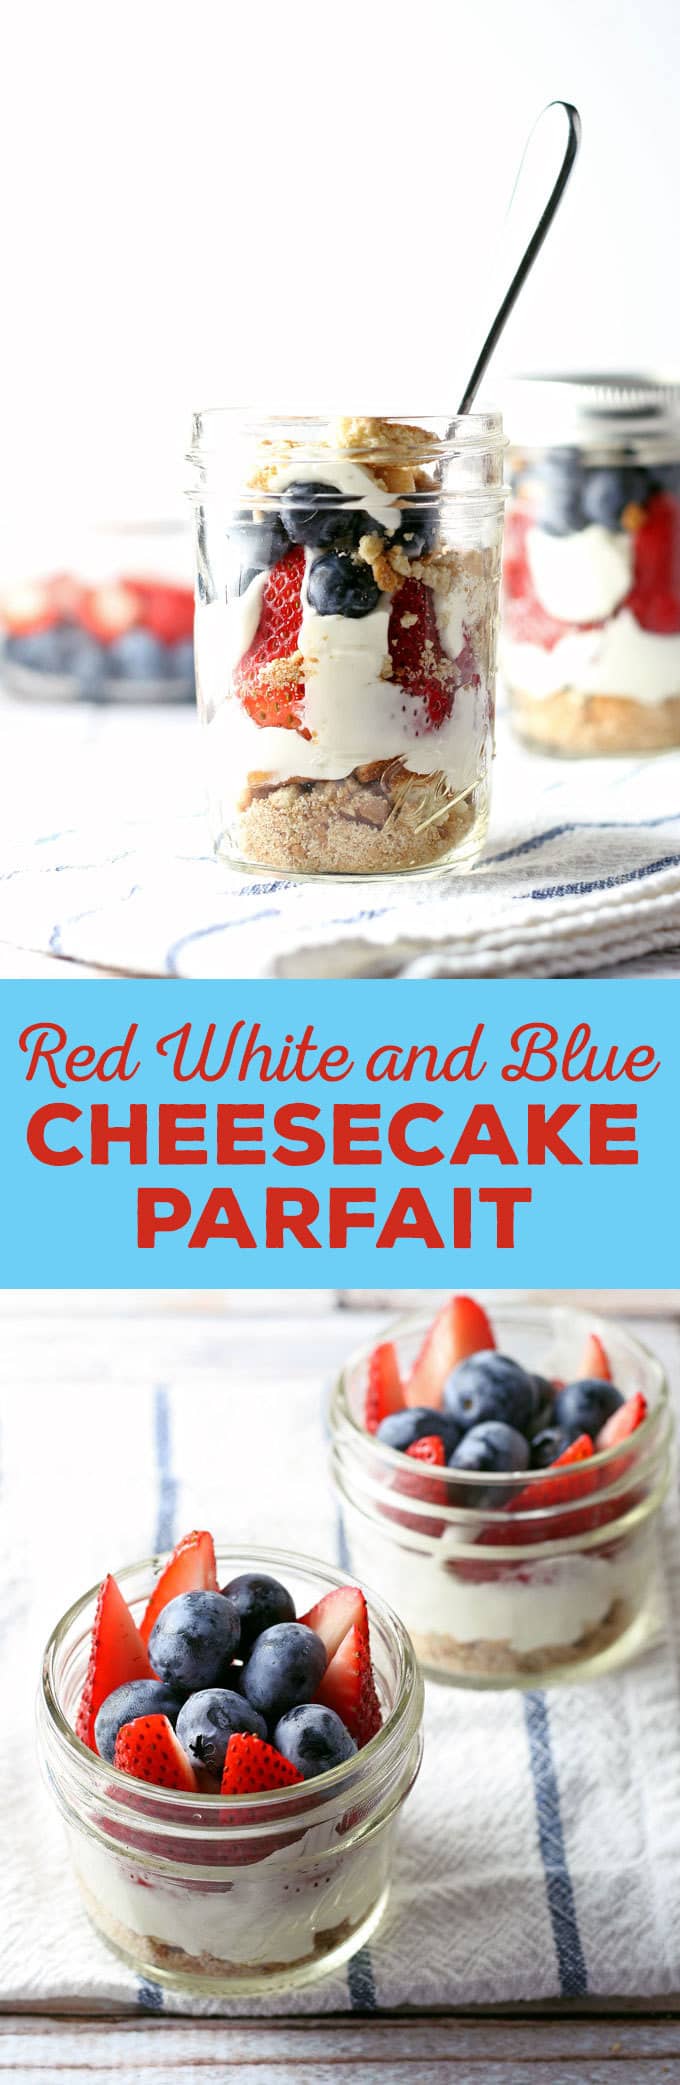 This red white and blue cheesecake parfait recipe is the perfect dessert for Memorial Day, Labor Day and Fourth of July parties! They are easy to make, full of fresh fruit and delicious! | honeyandbirch.com